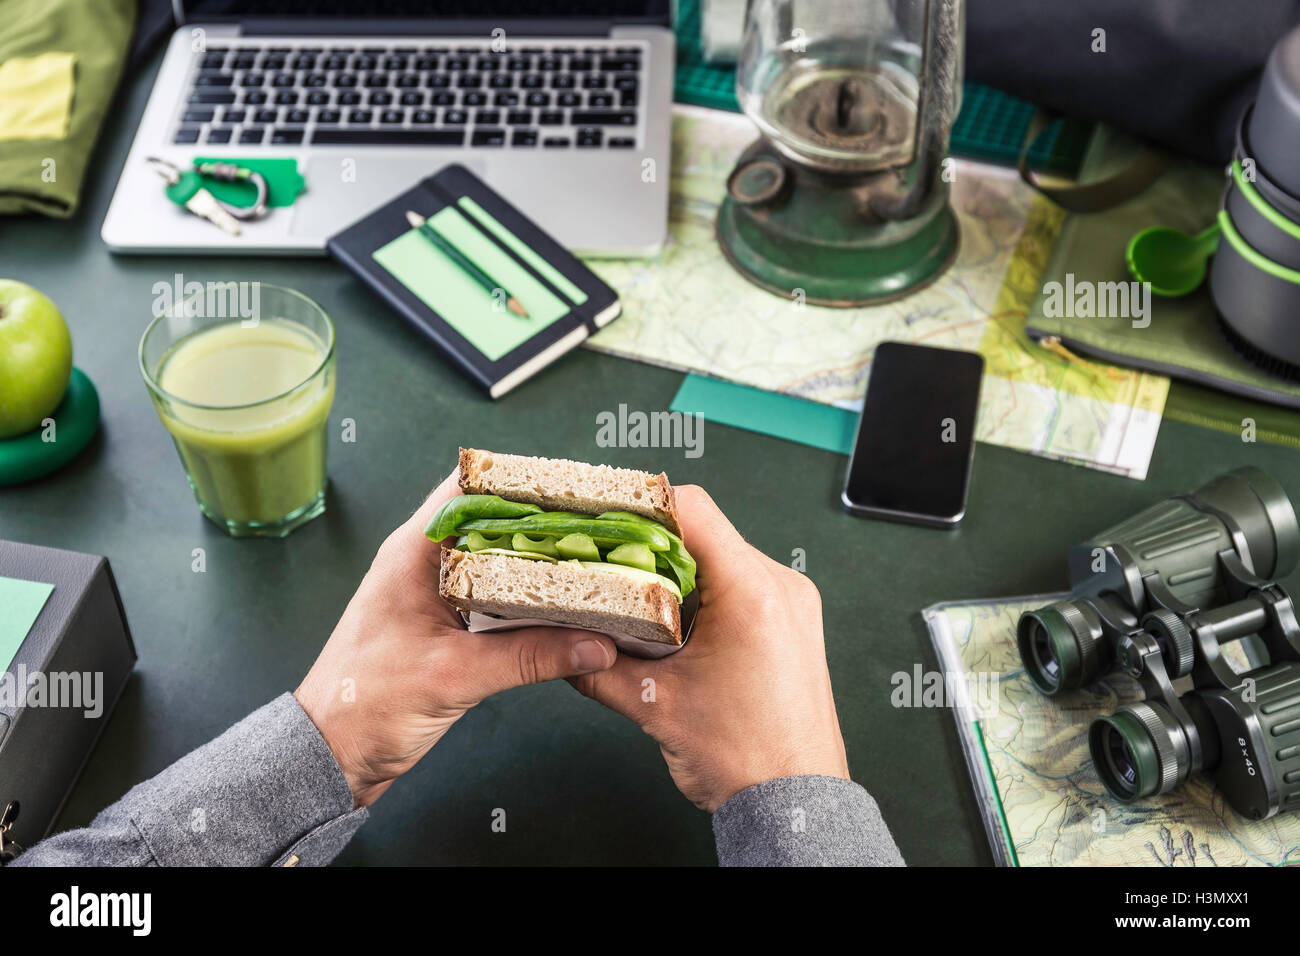 Mans hand's holding sandwich at table with hiking equipment and laptop Stock Photo